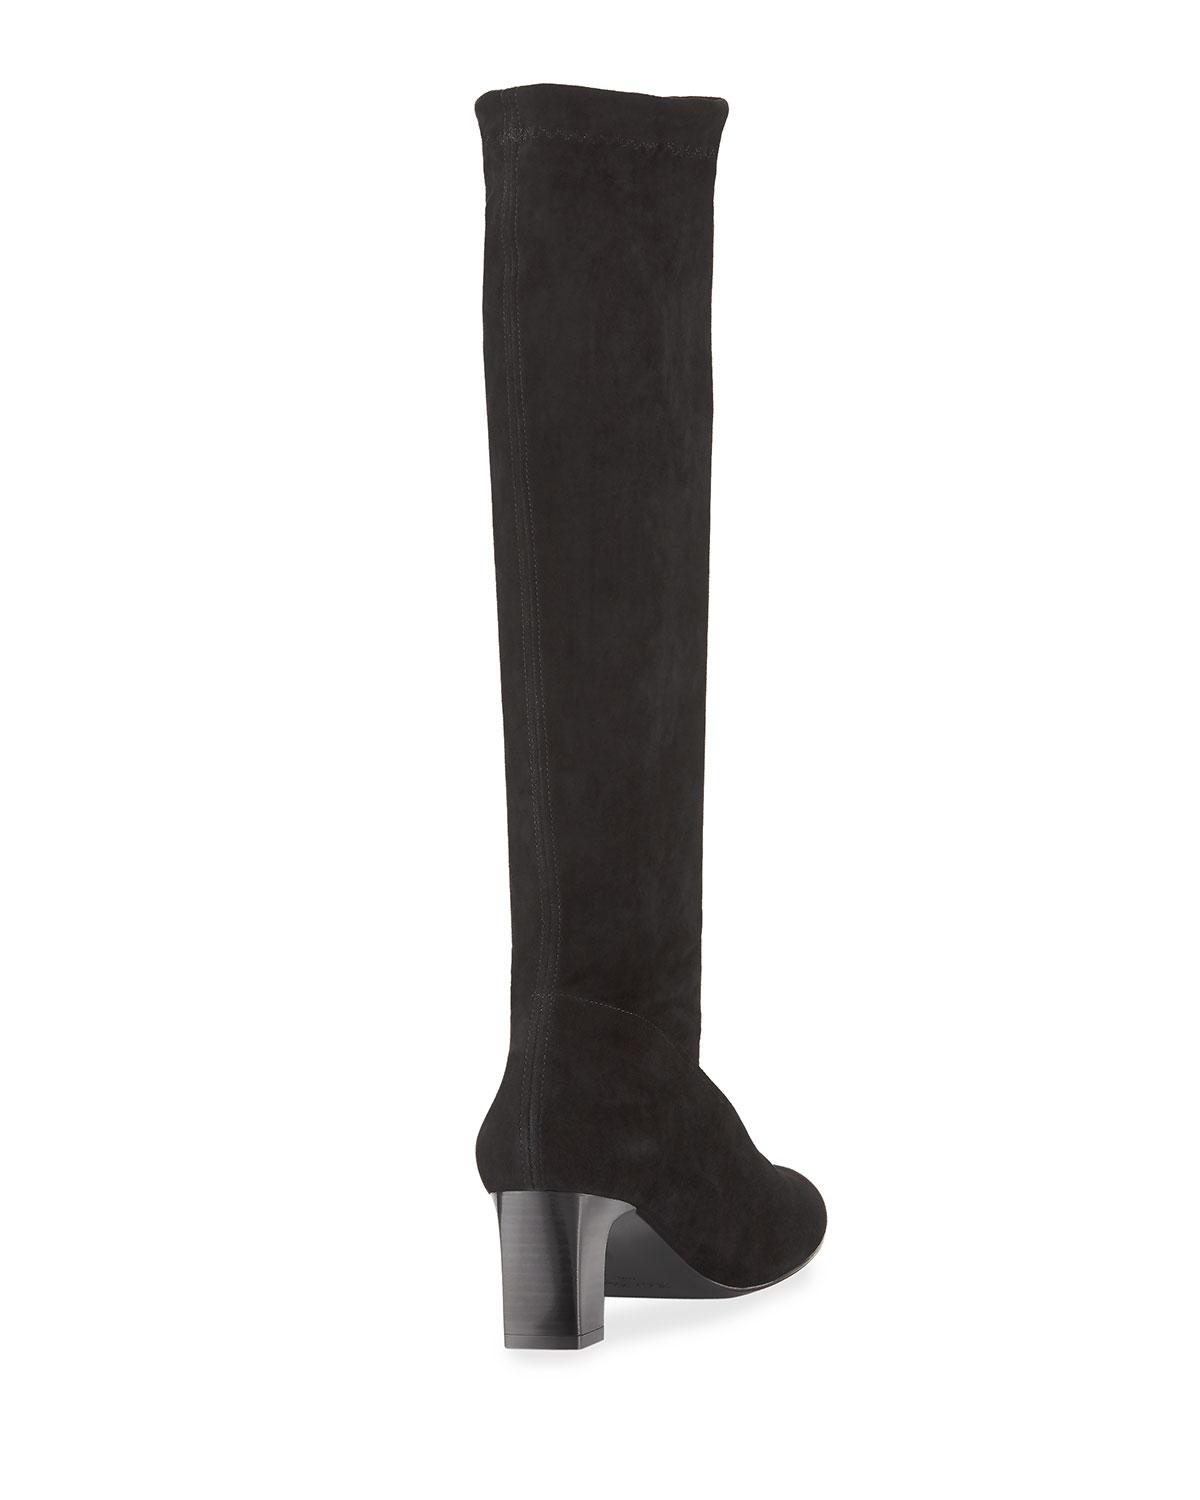 Robert Clergerie Suede Over-the-knee Boot in Brown - Lyst